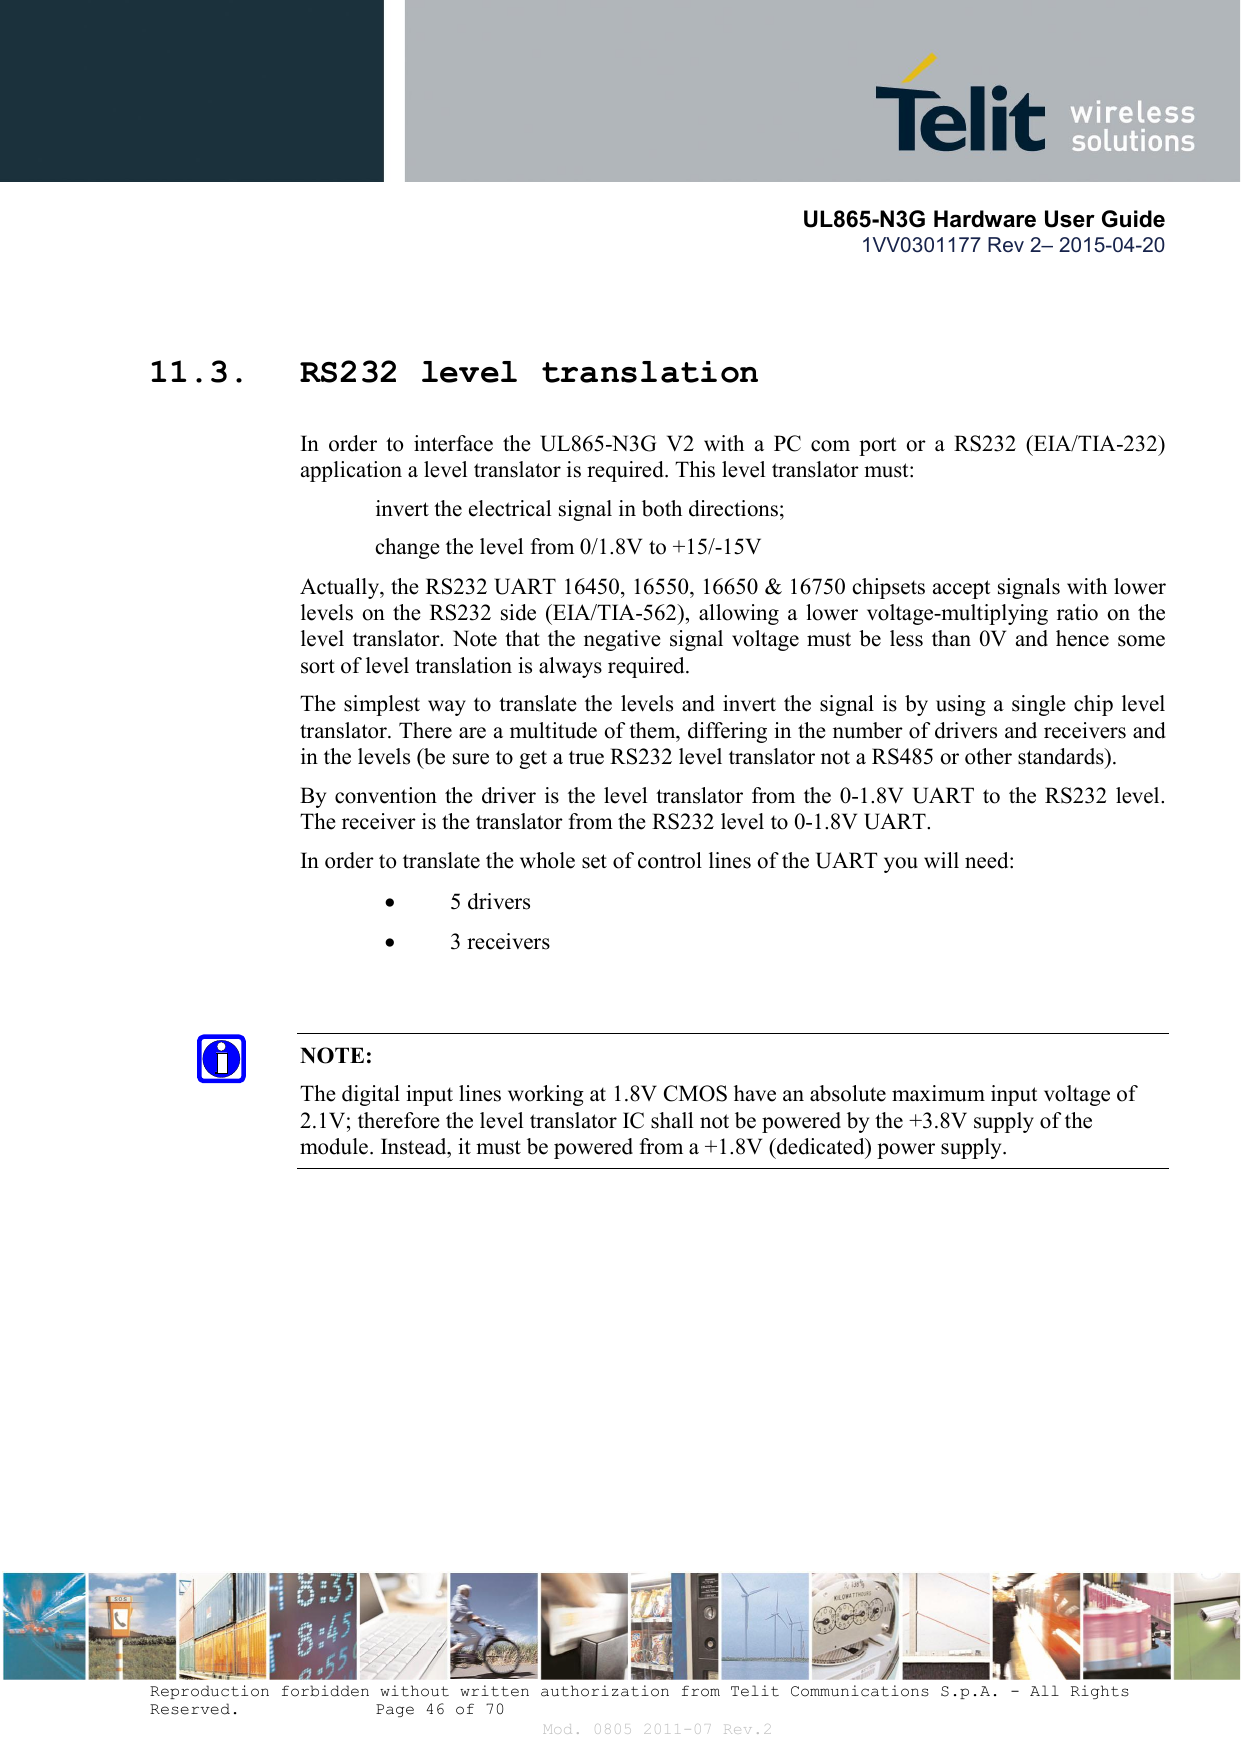       UL865-N3G Hardware User Guide 1VV0301177 Rev 2– 2015-04-20  Reproduction forbidden without written authorization from Telit Communications S.p.A. - All Rights Reserved.    Page 46 of 70 Mod. 0805 2011-07 Rev.2  11.3. RS232 level translation In  order  to  interface  the  UL865-N3G  V2  with  a  PC  com  port  or  a  RS232  (EIA/TIA-232) application a level translator is required. This level translator must:  invert the electrical signal in both directions;  change the level from 0/1.8V to +15/-15V  Actually, the RS232 UART 16450, 16550, 16650 &amp; 16750 chipsets accept signals with lower levels on  the RS232 side (EIA/TIA-562), allowing a lower  voltage-multiplying ratio  on the level translator. Note that the negative signal voltage must be less than 0V and hence some sort of level translation is always required.  The simplest way to translate the levels and invert the signal is by using a single chip level translator. There are a multitude of them, differing in the number of drivers and receivers and in the levels (be sure to get a true RS232 level translator not a RS485 or other standards). By convention the  driver is the level translator from the 0-1.8V UART to  the RS232 level. The receiver is the translator from the RS232 level to 0-1.8V UART. In order to translate the whole set of control lines of the UART you will need:  5 drivers  3 receivers   NOTE: The digital input lines working at 1.8V CMOS have an absolute maximum input voltage of 2.1V; therefore the level translator IC shall not be powered by the +3.8V supply of the module. Instead, it must be powered from a +1.8V (dedicated) power supply.    